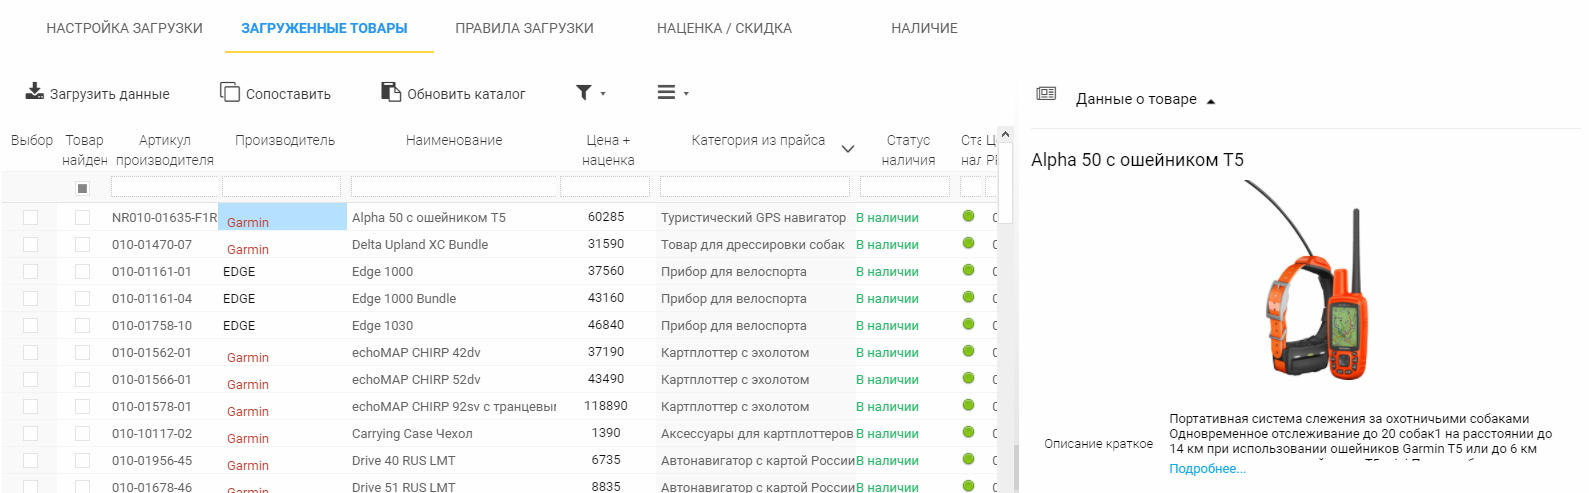 Configuring the loading of goods from the price list in XML format - Yandex Market YML - Elbuz Jumper from ElbuzGroup dropshipping suppliers aliexpress amazon shopify best beginners apps products ebay wix distributors how to start business vendors stores alibaba compares your prices orders for suppliers create catalog